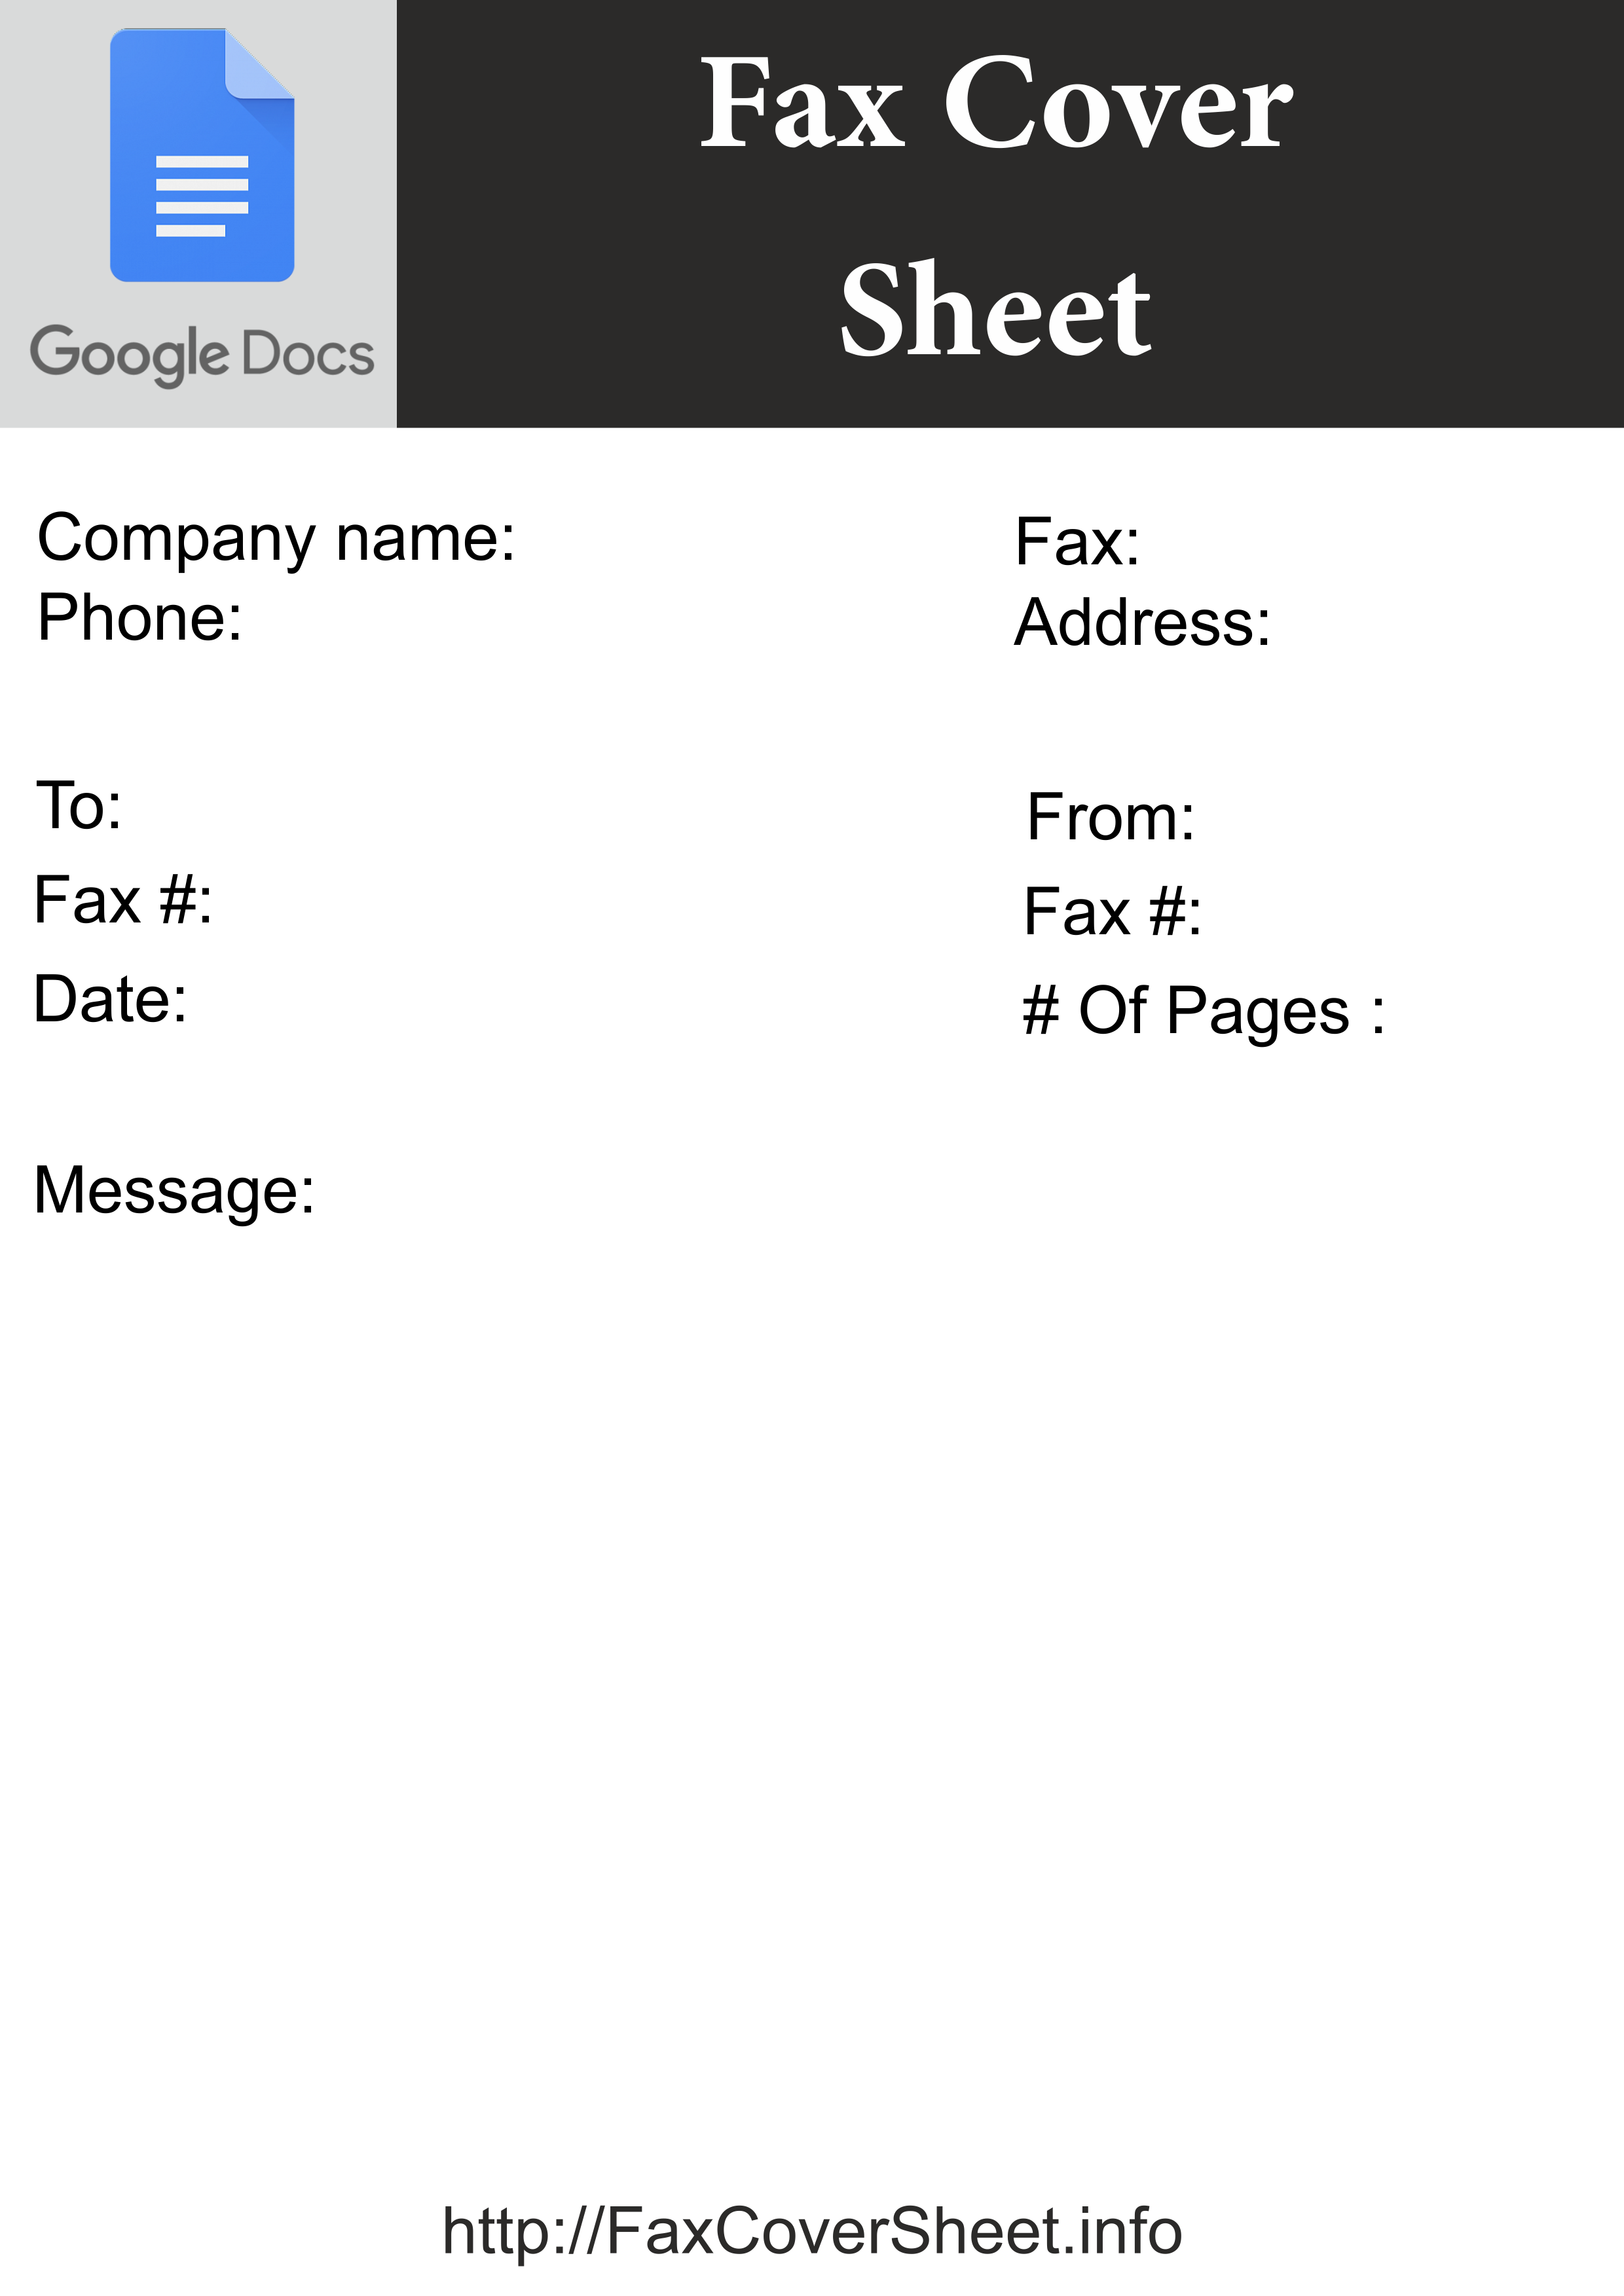 ready-to-use-google-docs-fax-cover-sheet-free-fax-cover-sheet-how-to